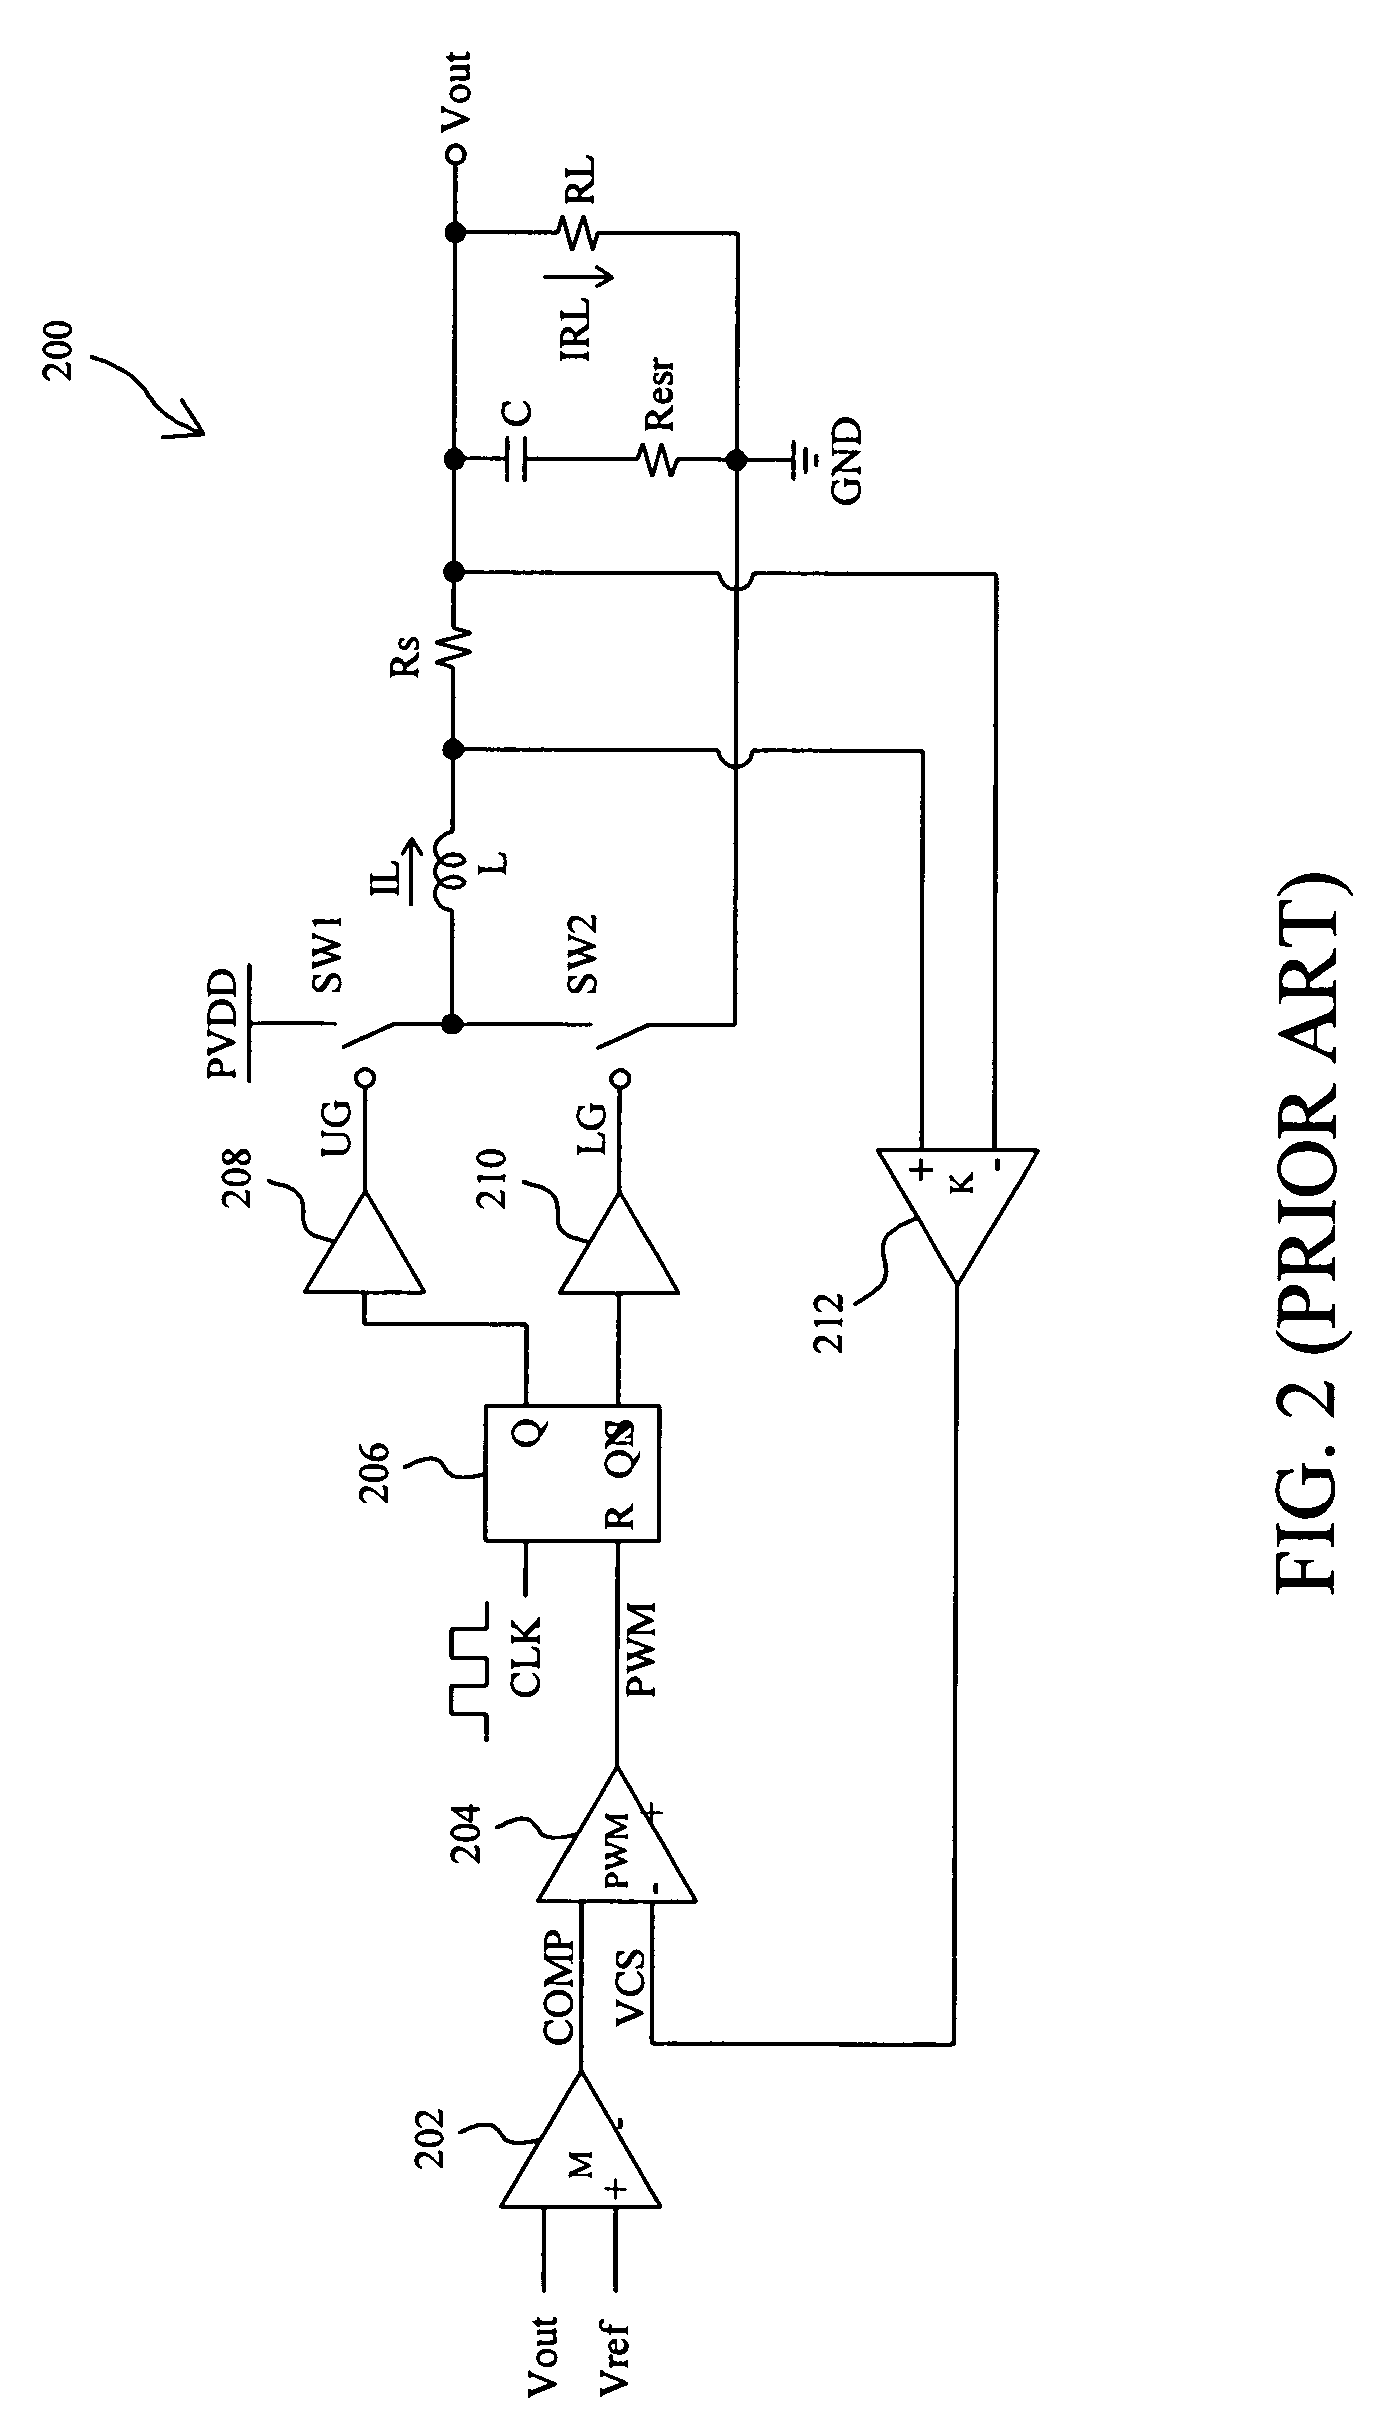 Current feed-through adaptive voltage position control for a voltage regulator